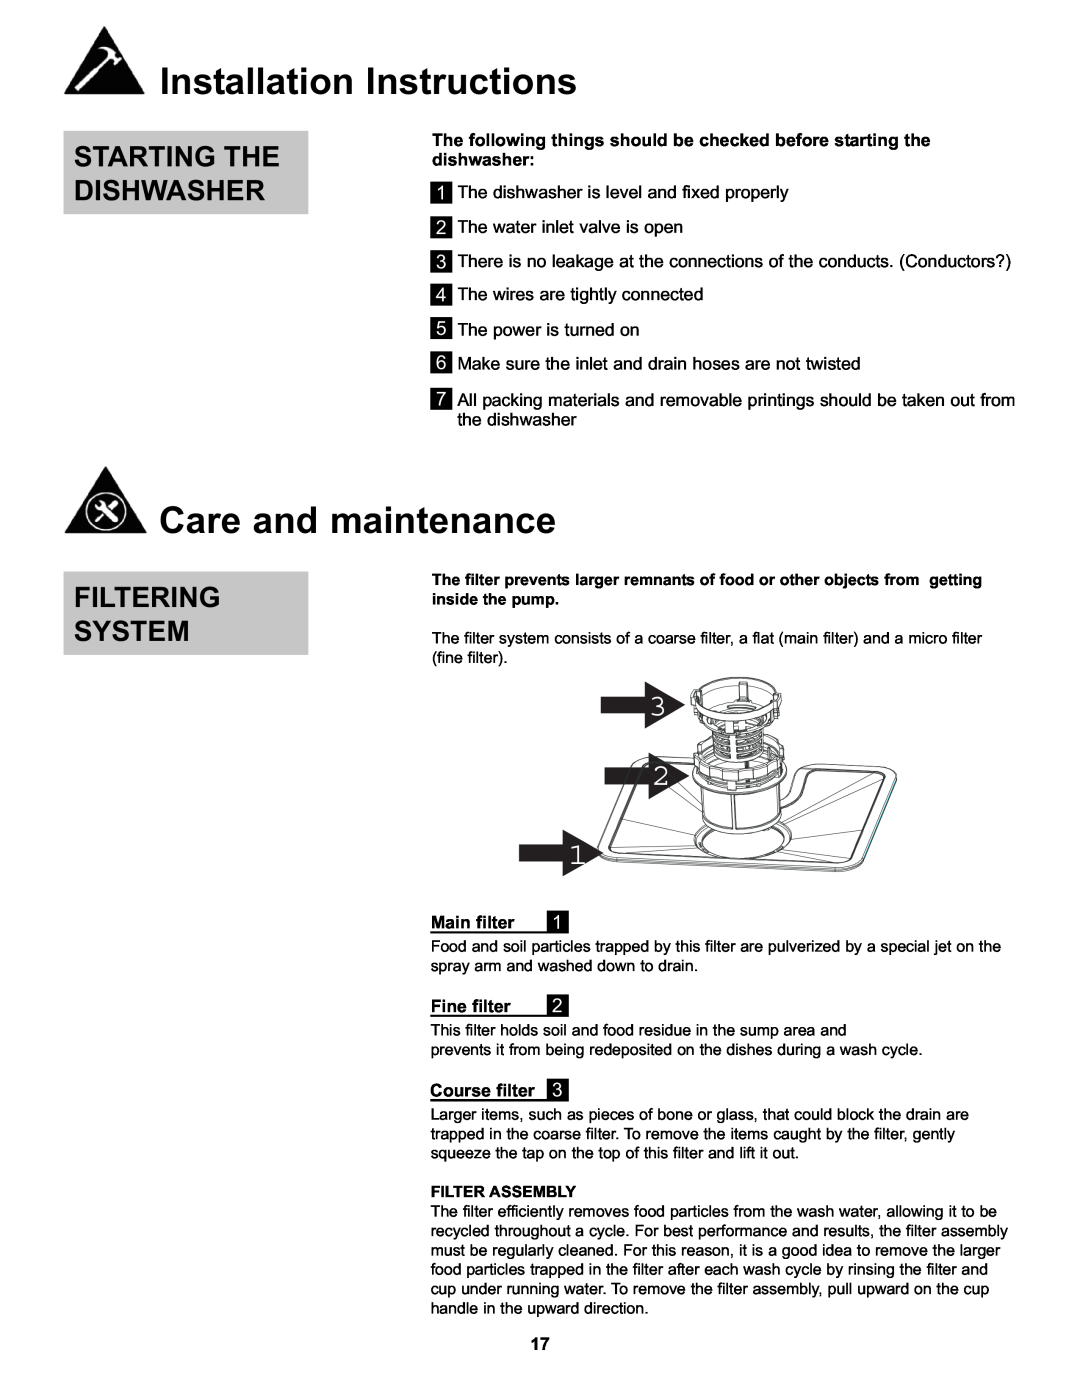 Danby DDW611WLED manual Care and maintenance, Starting The Dishwasher, Filtering System, Installation Instructions 